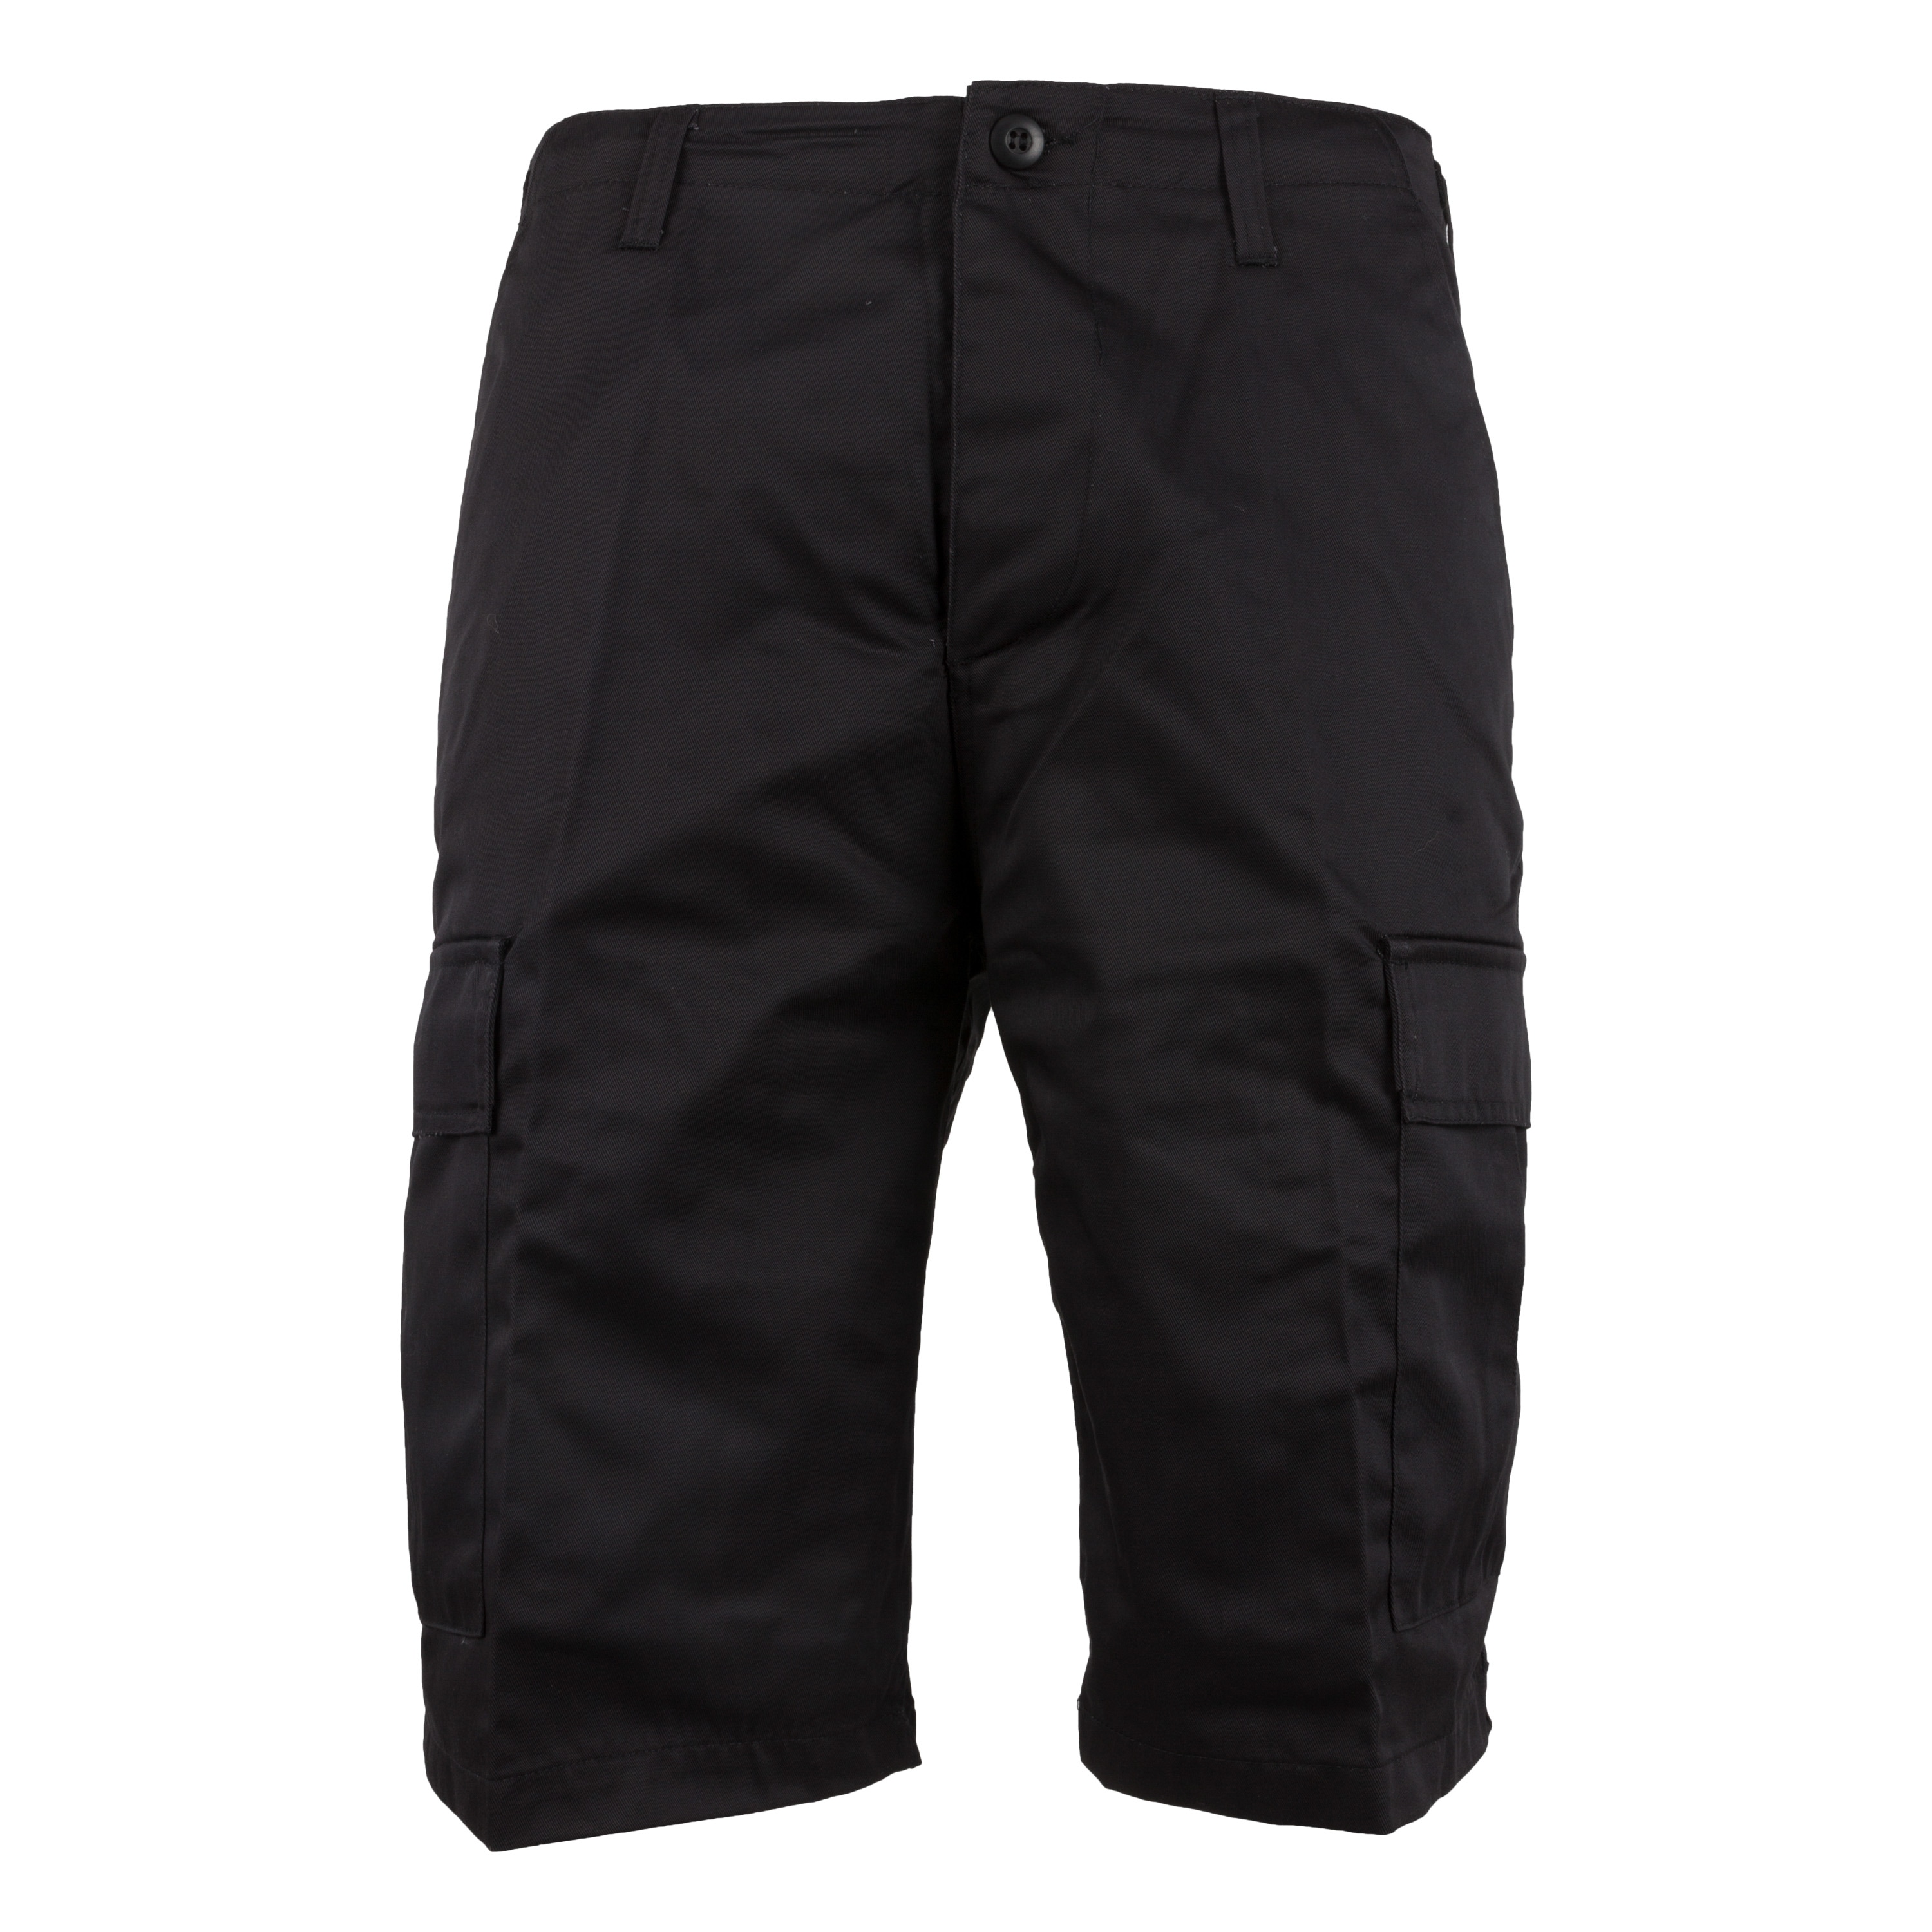 Purchase the BDU Shorts black by ASMC